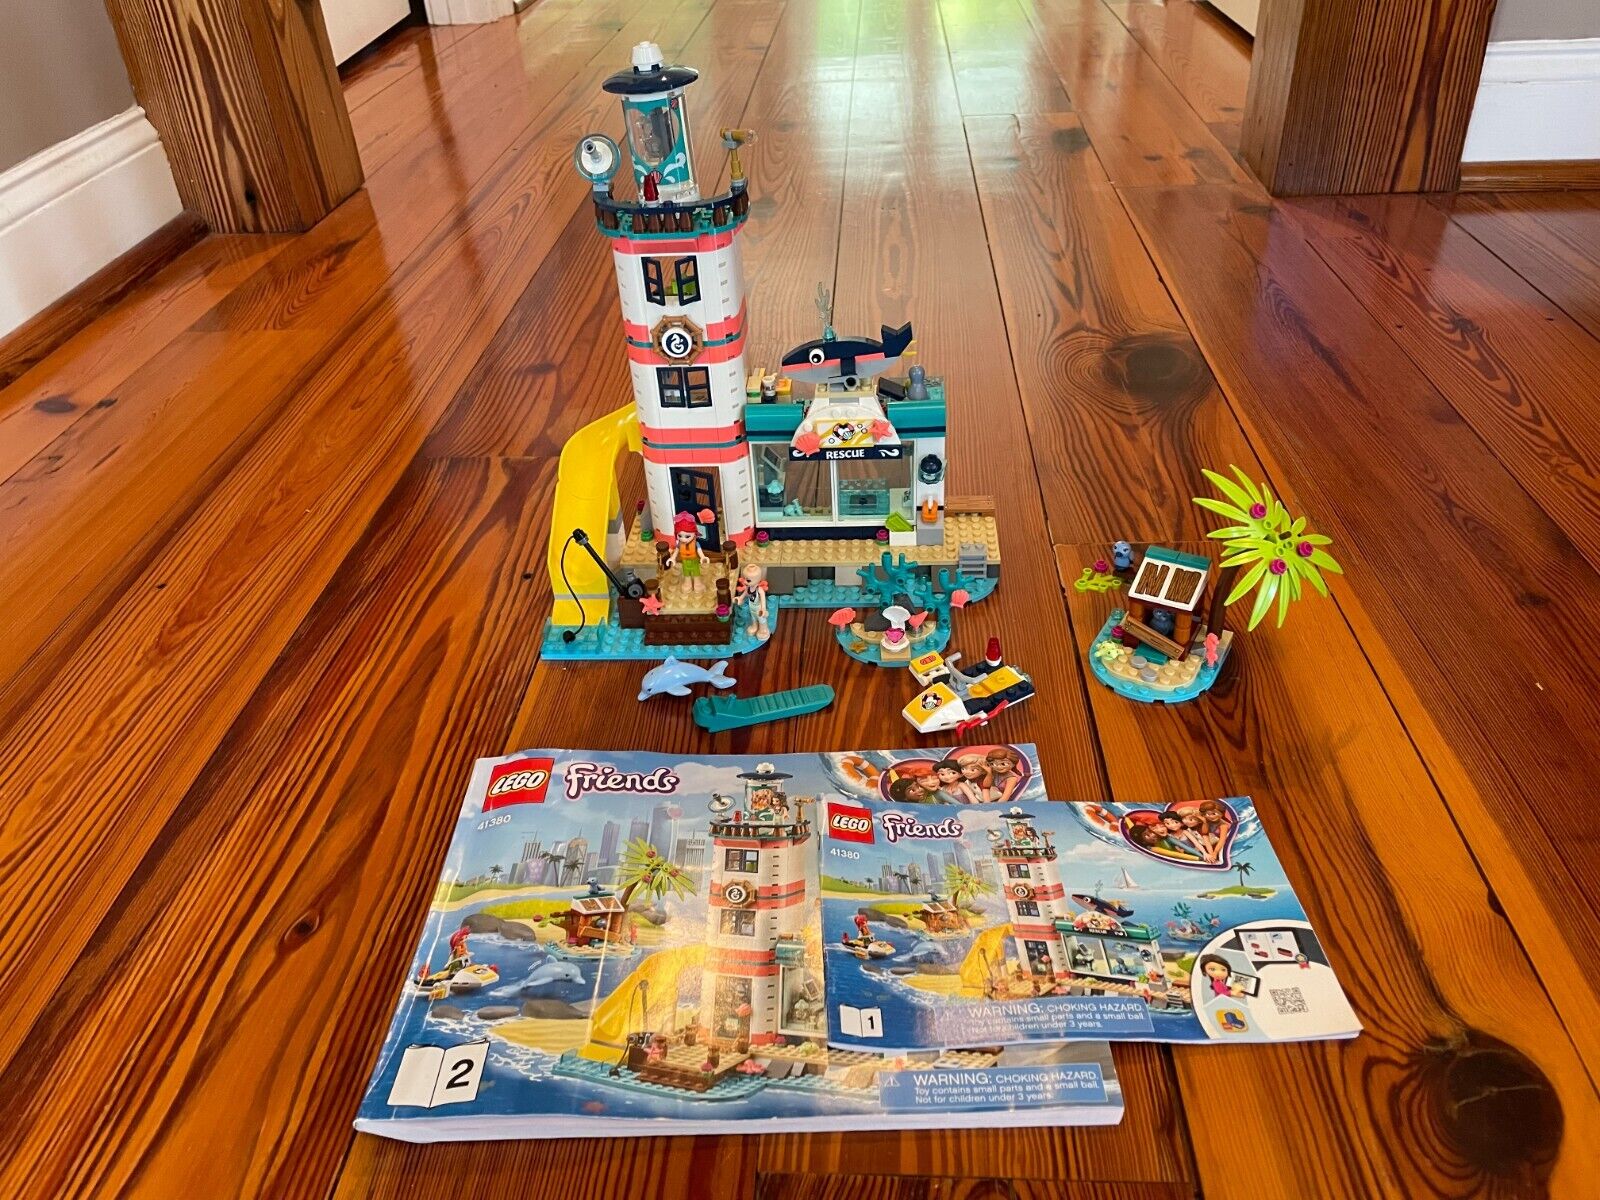 Lego 41380 Friends Lighthouse Rescue Center with both manuals